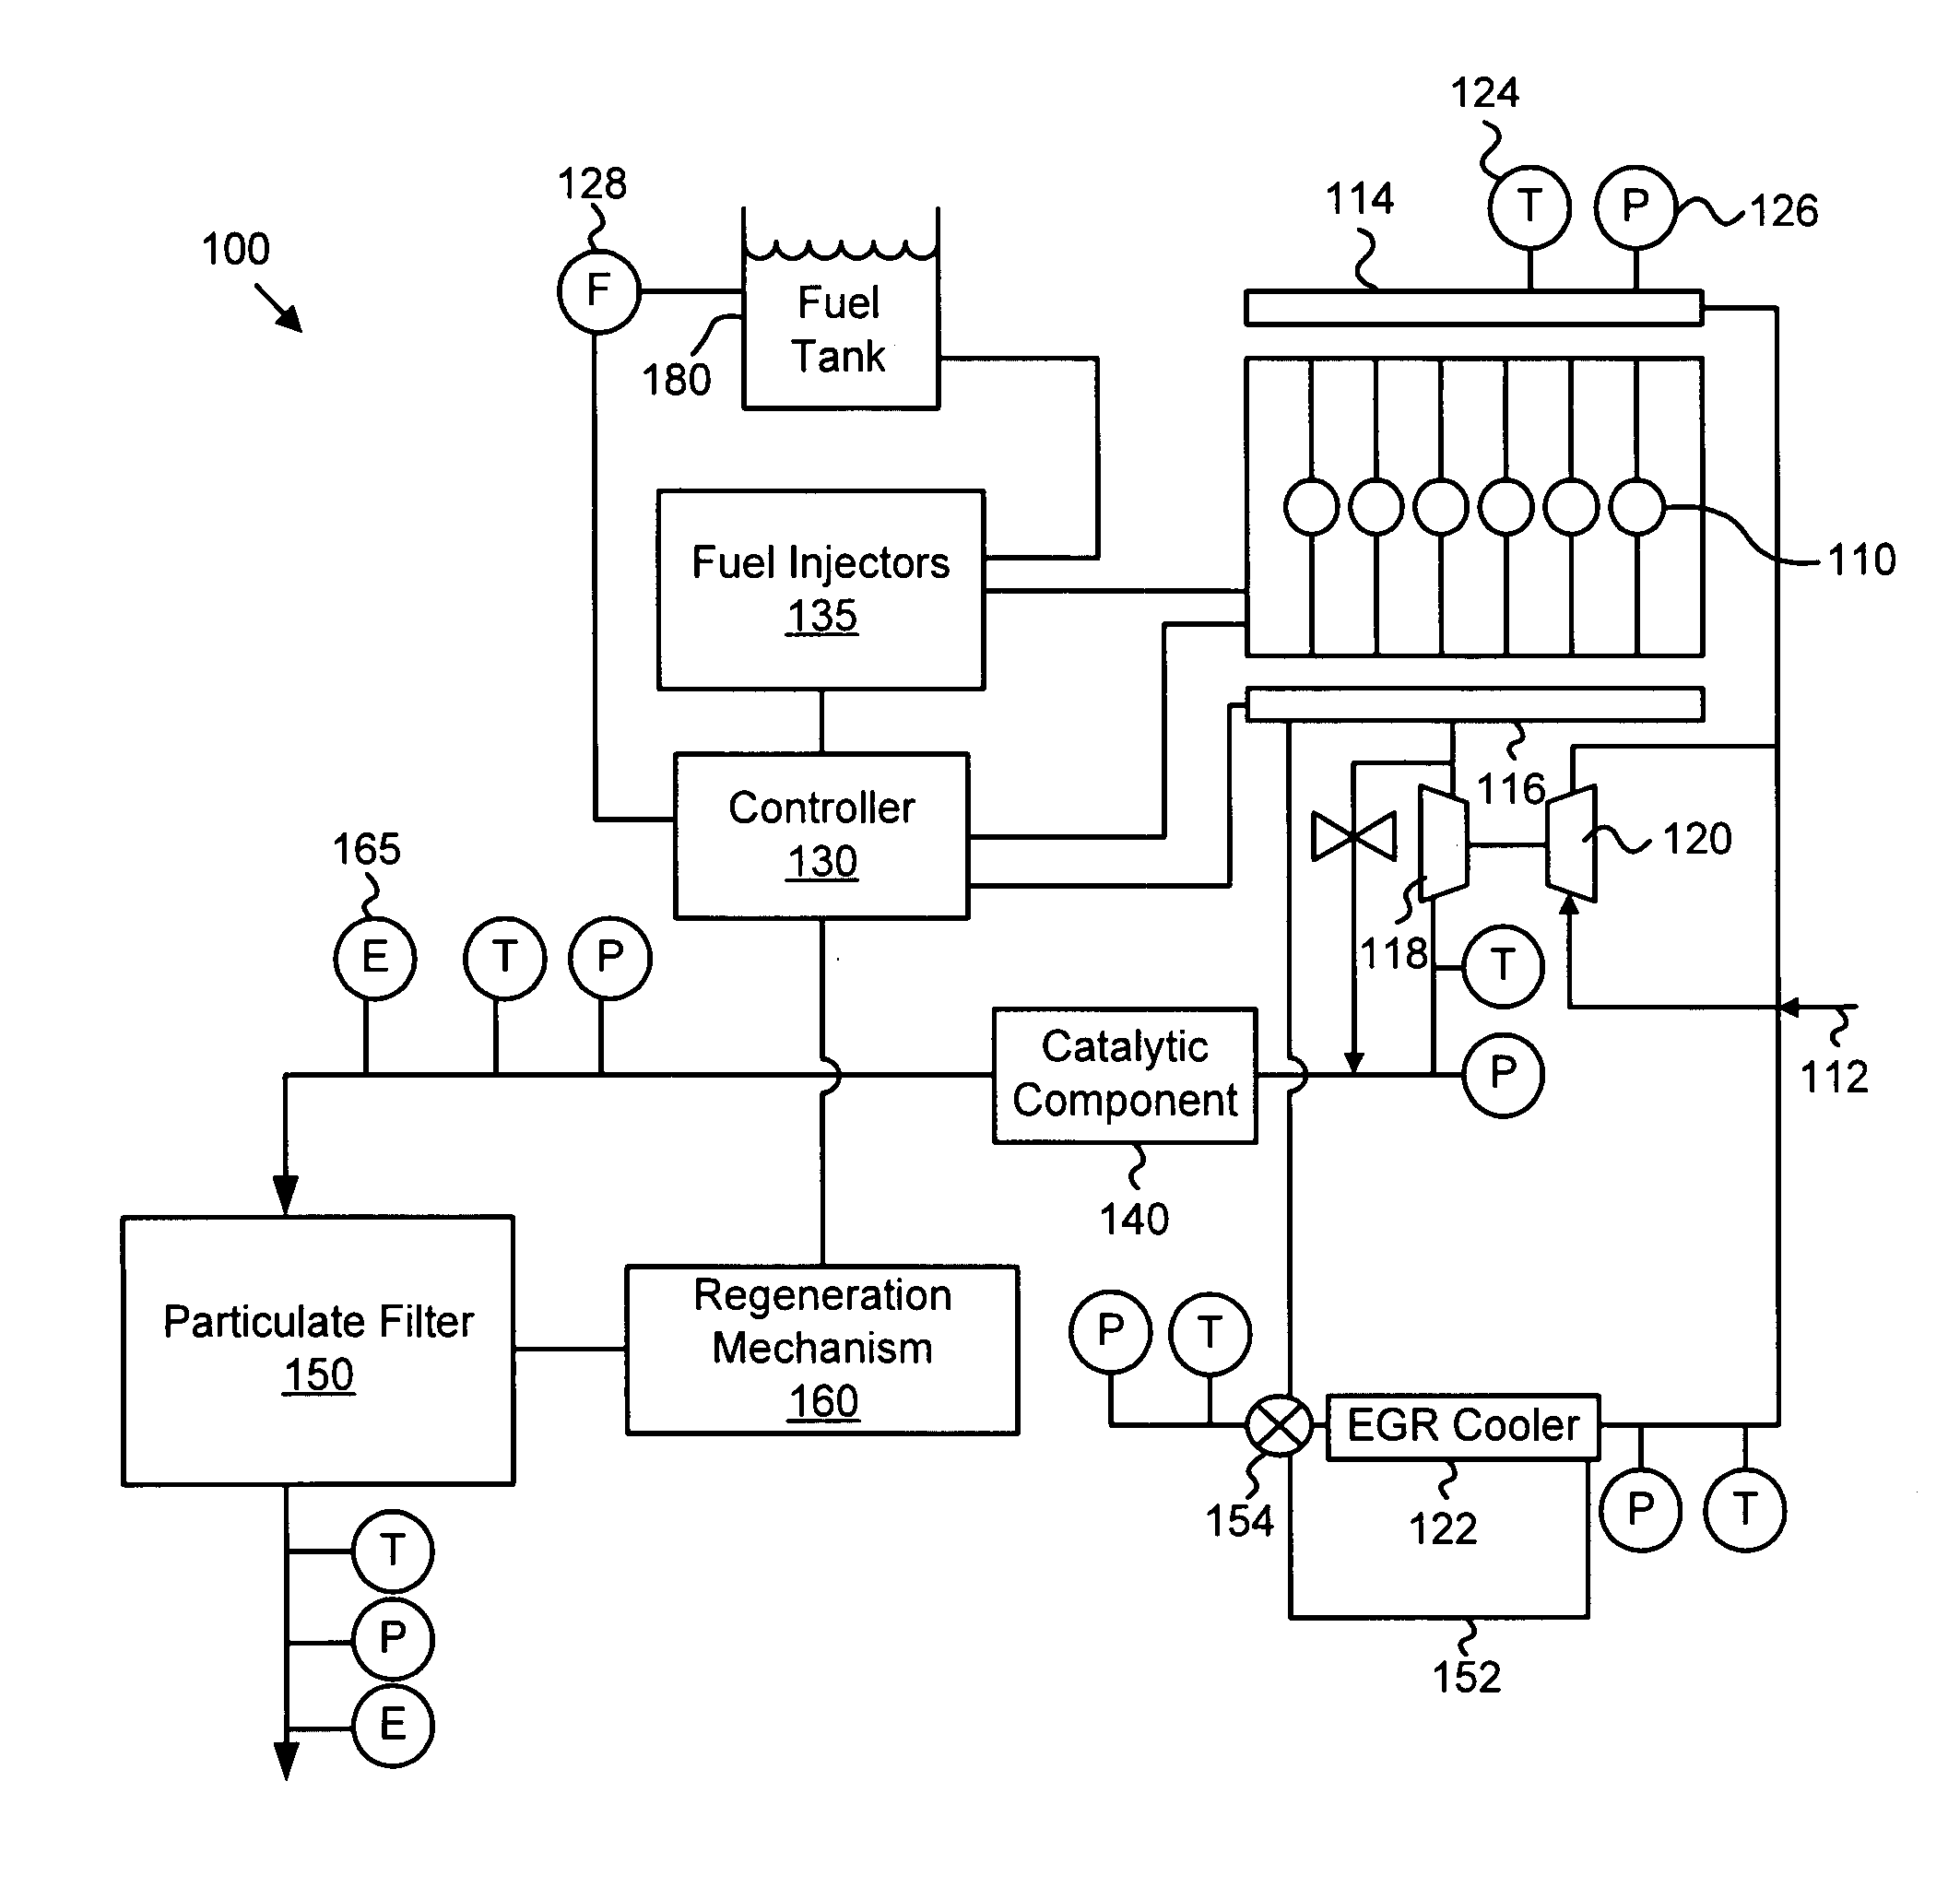 Apparatus, system, and method for estimating particulate production